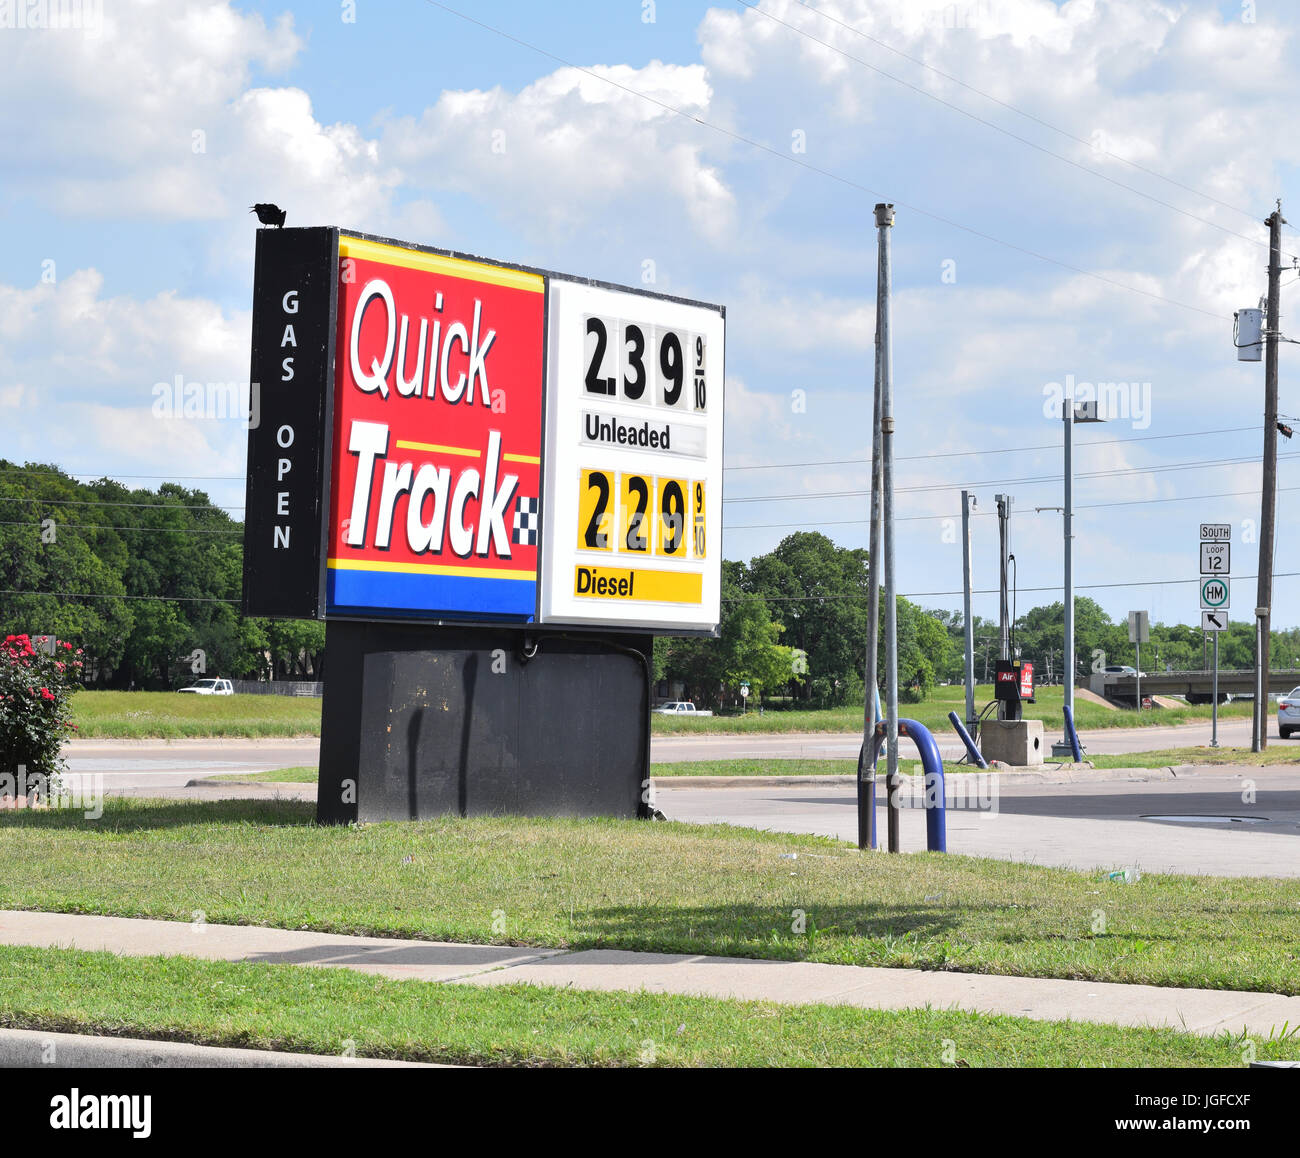 Gas prices at American petrol station (gas station) showing high gas prices Stock Photo